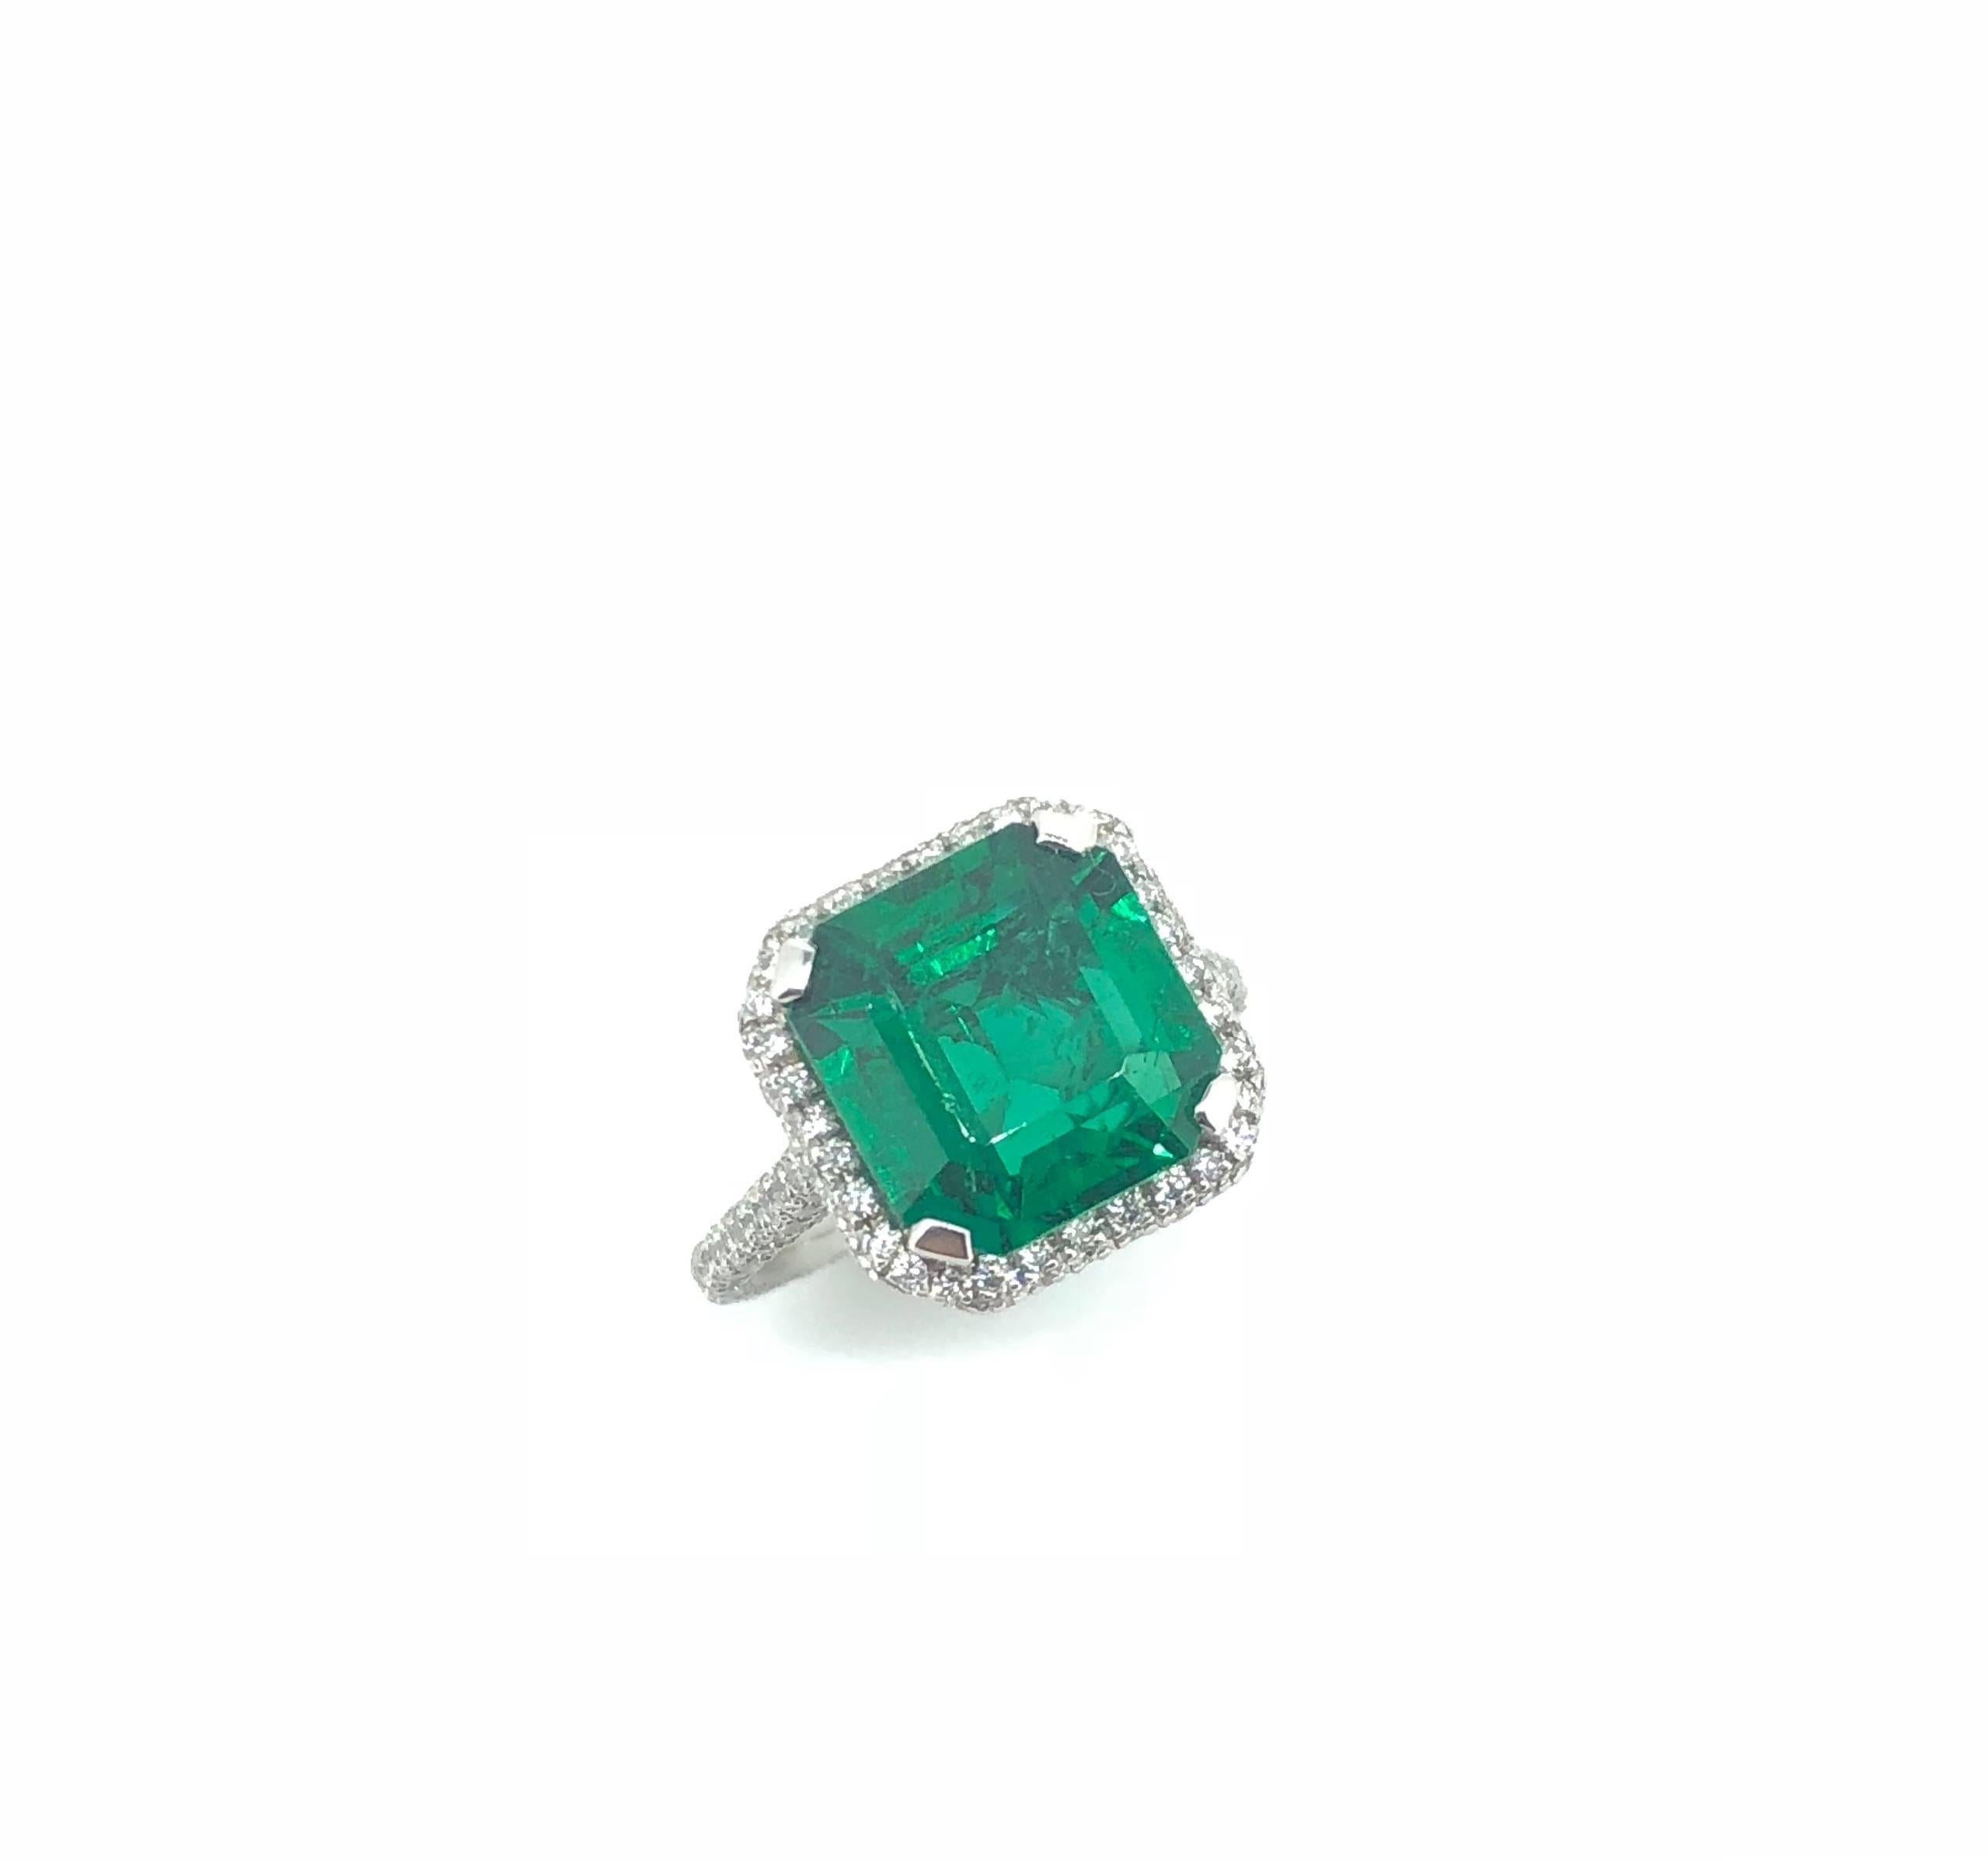 Emerald Cut  4.41 Carat mounted in Platinum Diamond Cluster Ring. 

The emerald exhibits vivid green colour with vibrant lustre mounted in modern diamond cluster ring. The setting and band fully encrusted with round brilliant cut diamonds in